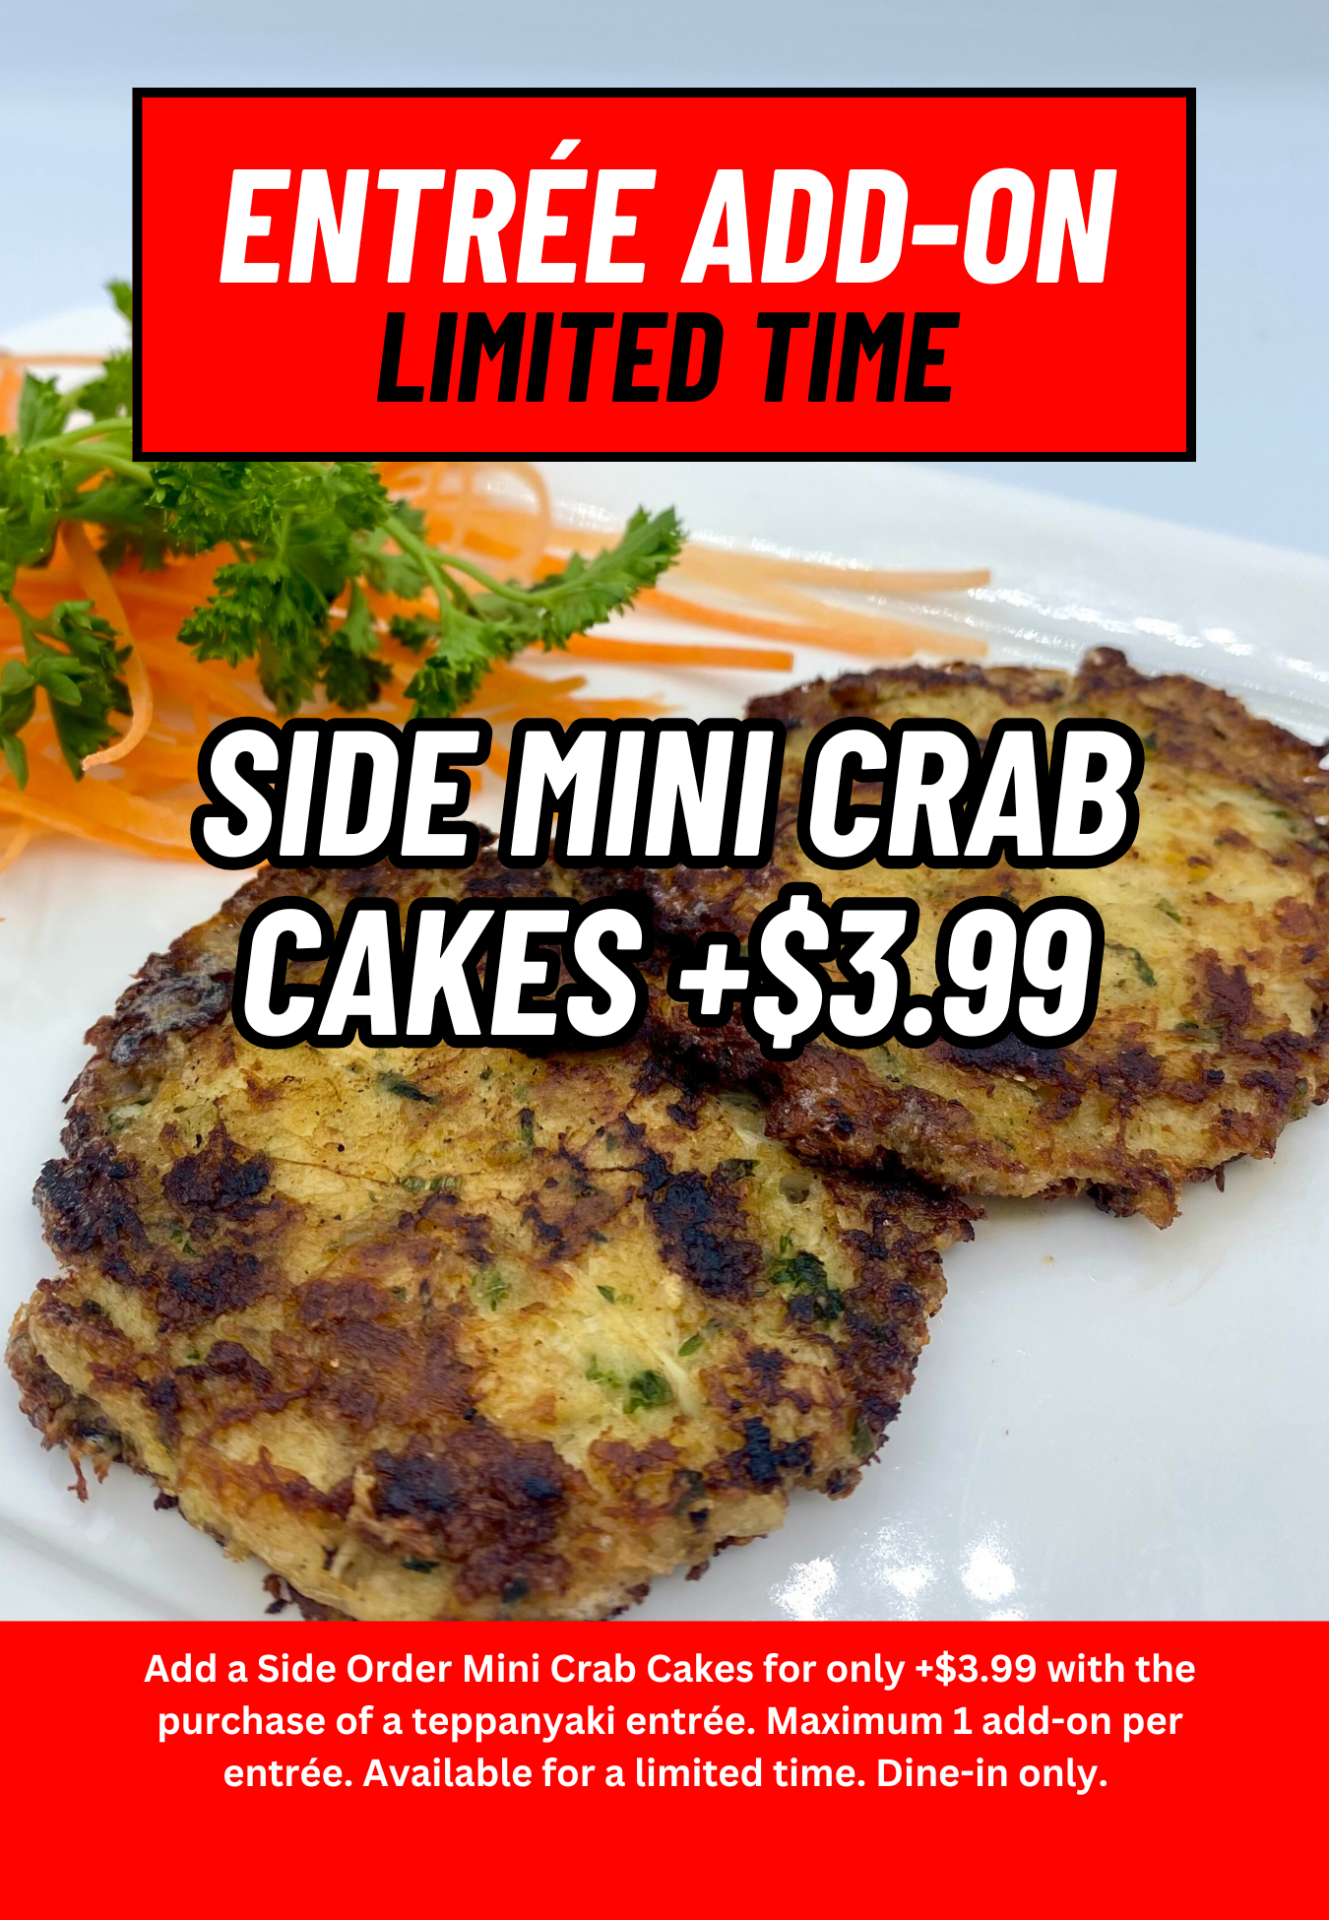 Entree add-on Limited time. Side Mini Crab Cakes +$3.99. Add a Side Order Mini Crab Cakes for only +$3.99 with the purchase of a teppanyaki entrée. Maximum 1 add-on per entrée. Available for a limited time. Dine-in only. 